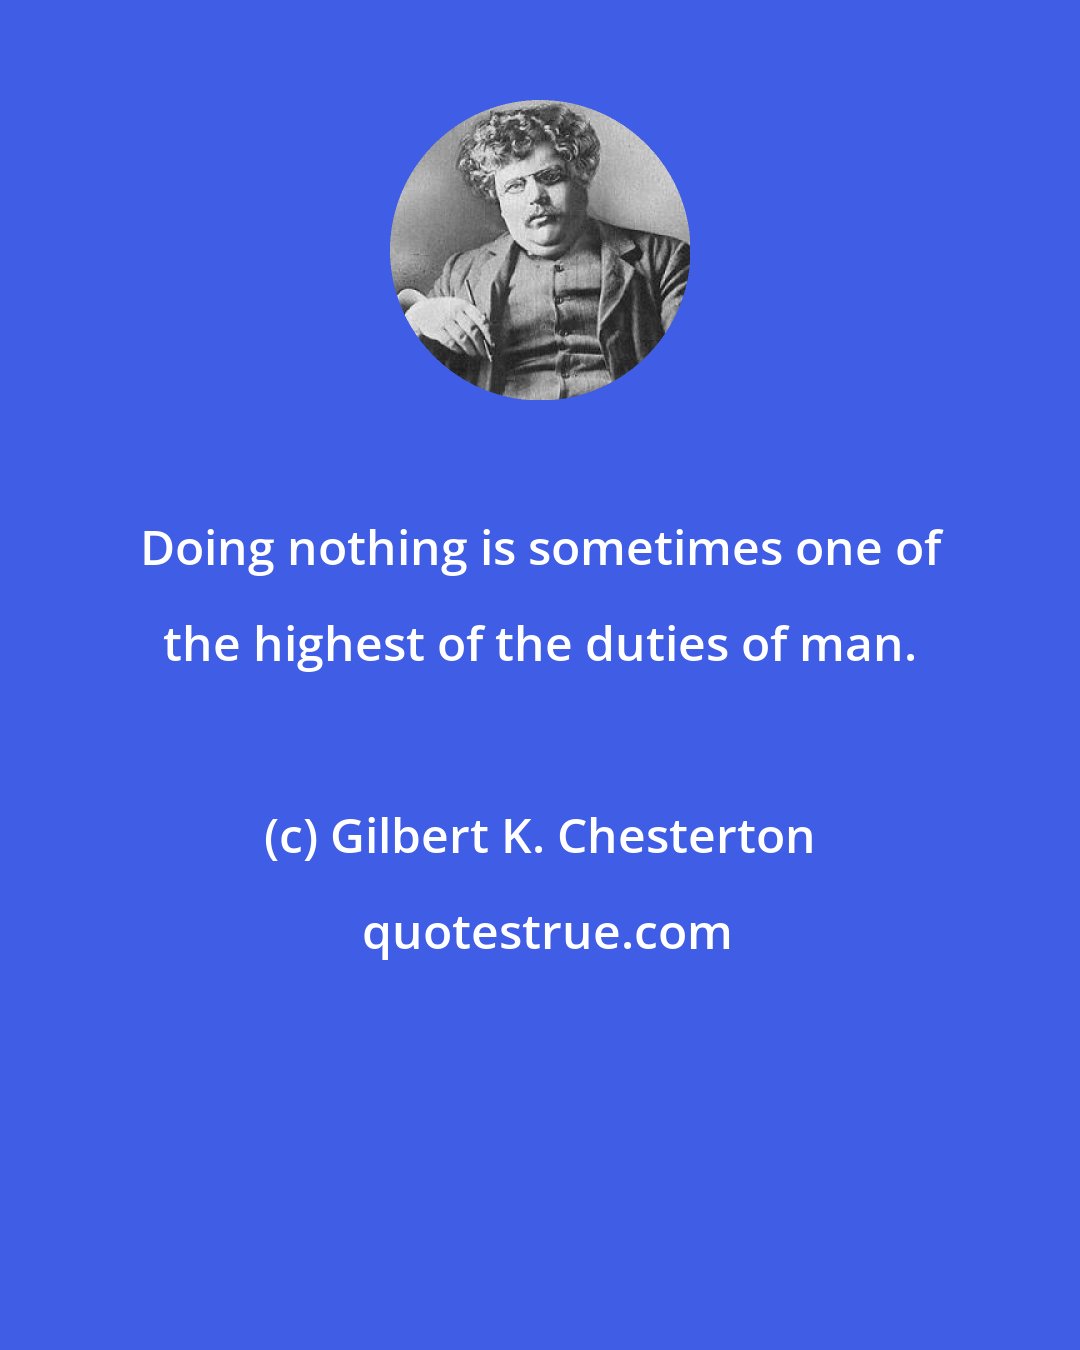 Gilbert K. Chesterton: Doing nothing is sometimes one of the highest of the duties of man.